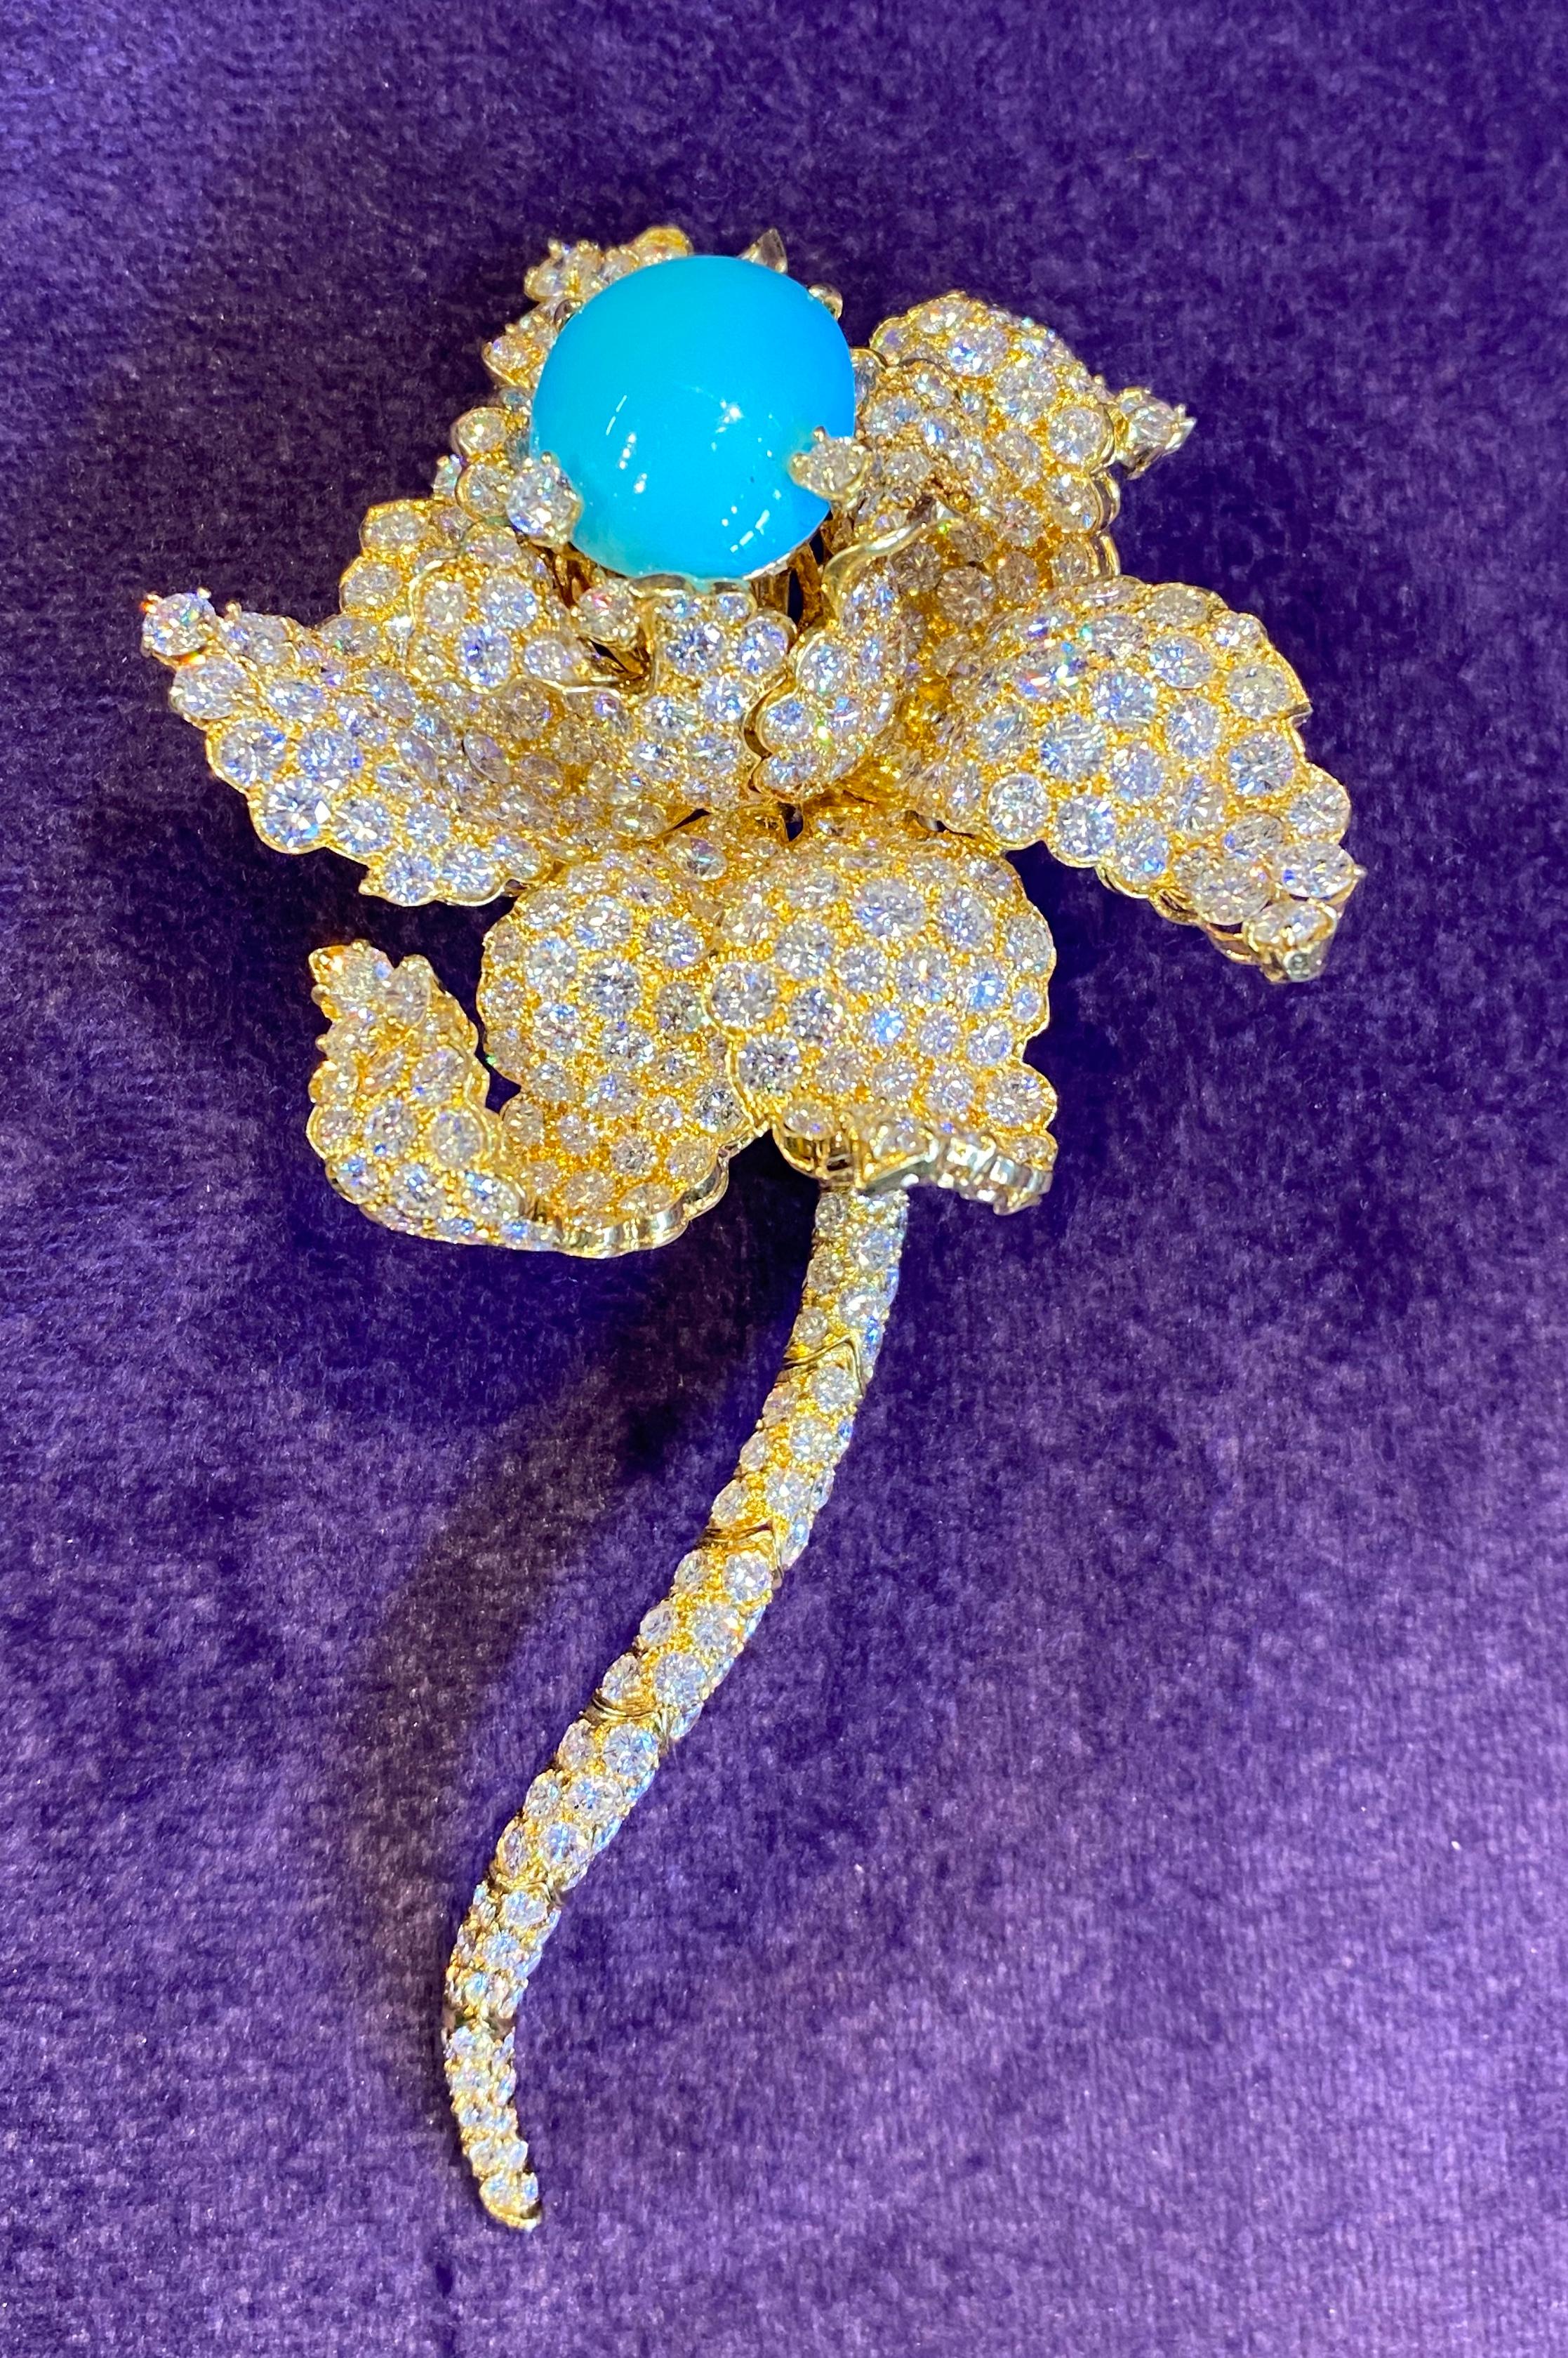 Cabochon Turquoise & Diamond Flower Brooch For Sale